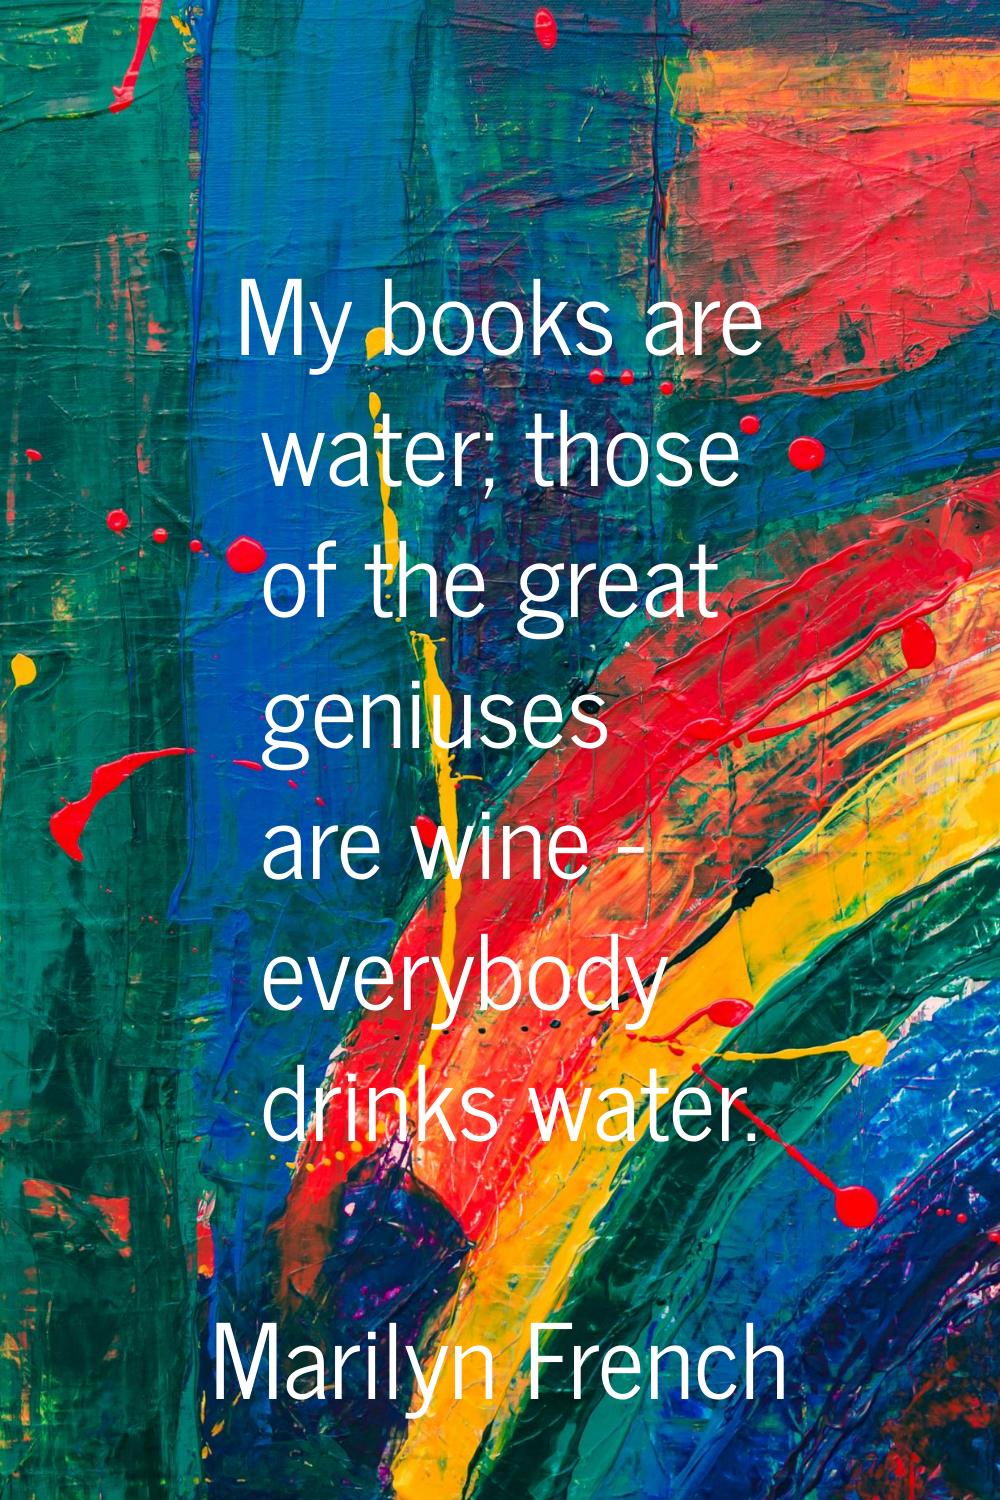 My books are water; those of the great geniuses are wine - everybody drinks water.